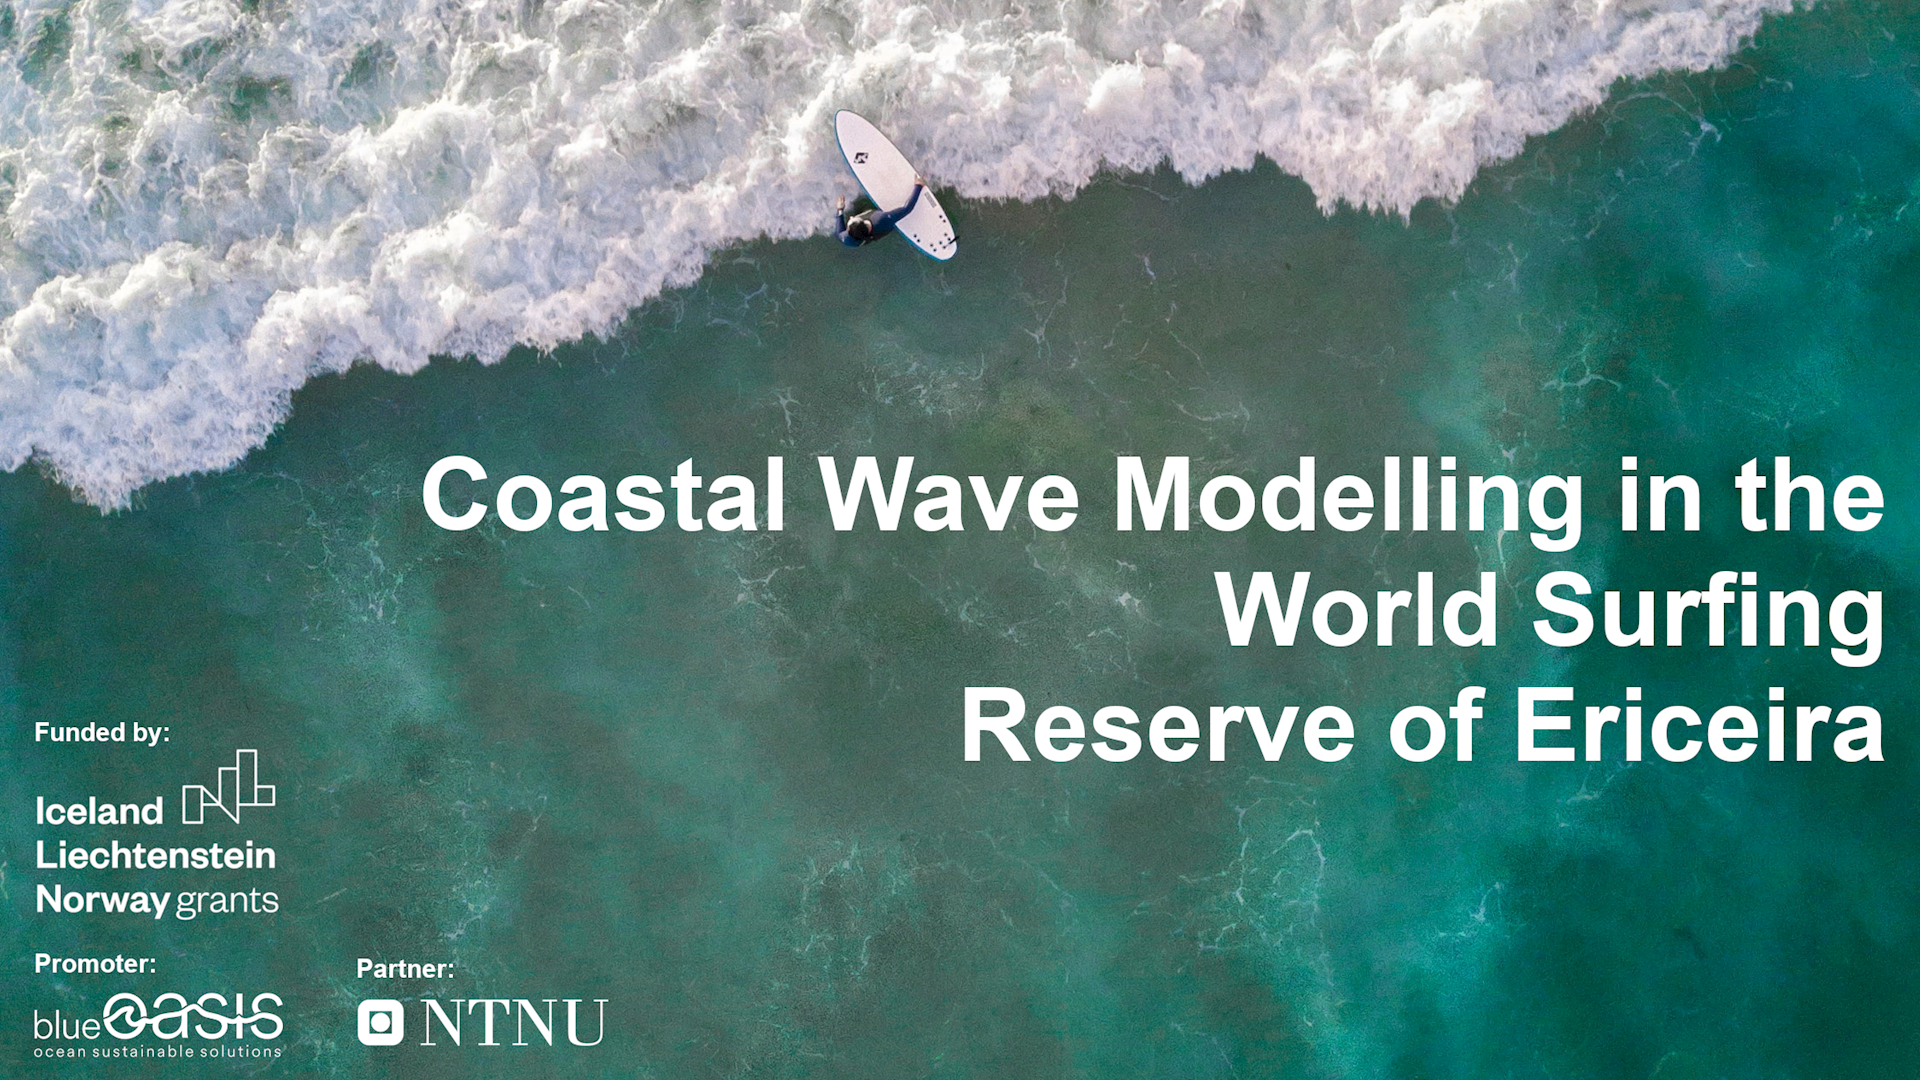 Coastal wave modelling in the World Surfing Reserve of Ericeira